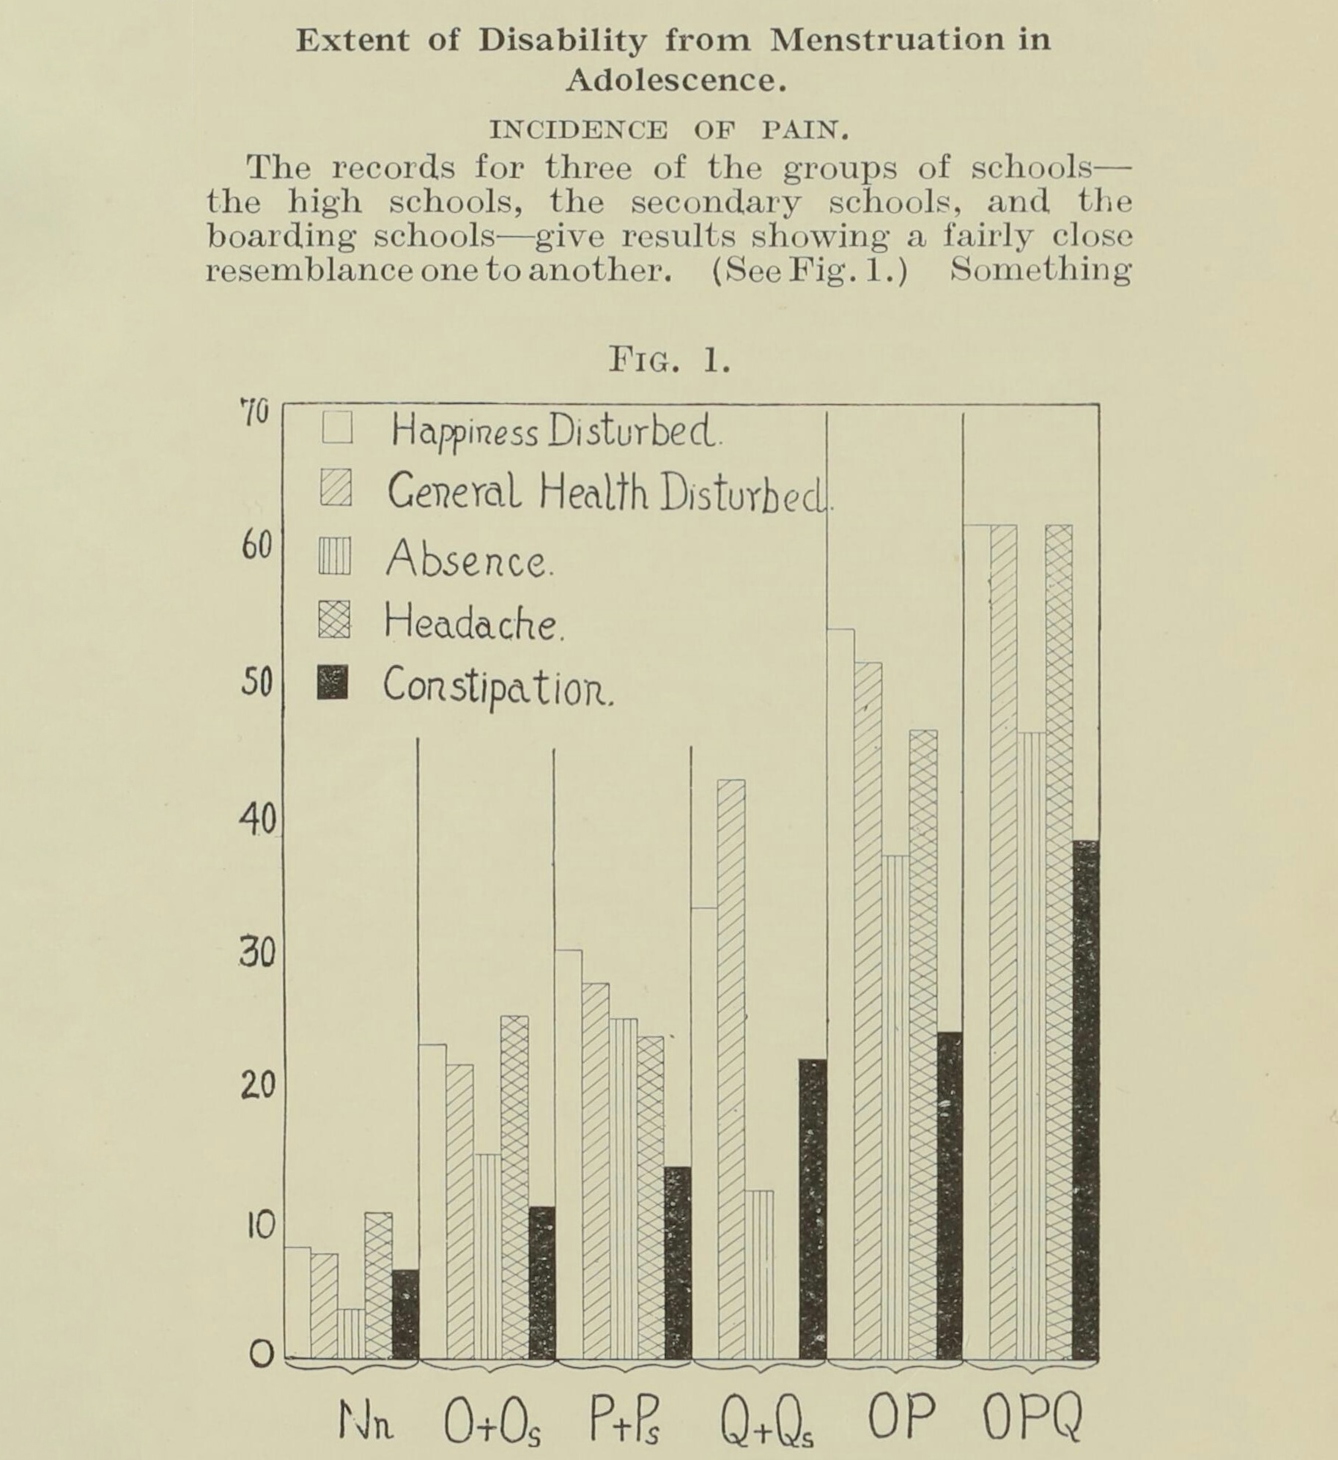 Printed text and graph of "Extent of Disability from Menstruation in Adolescence". The graph key shows that the bars depict "Happiness disturbed, general health disturbed, absence, headache, and constipation." There are separate groupings for high schools, secondary schools and boarding schools but as the text states, they have a fairly close resemblance.